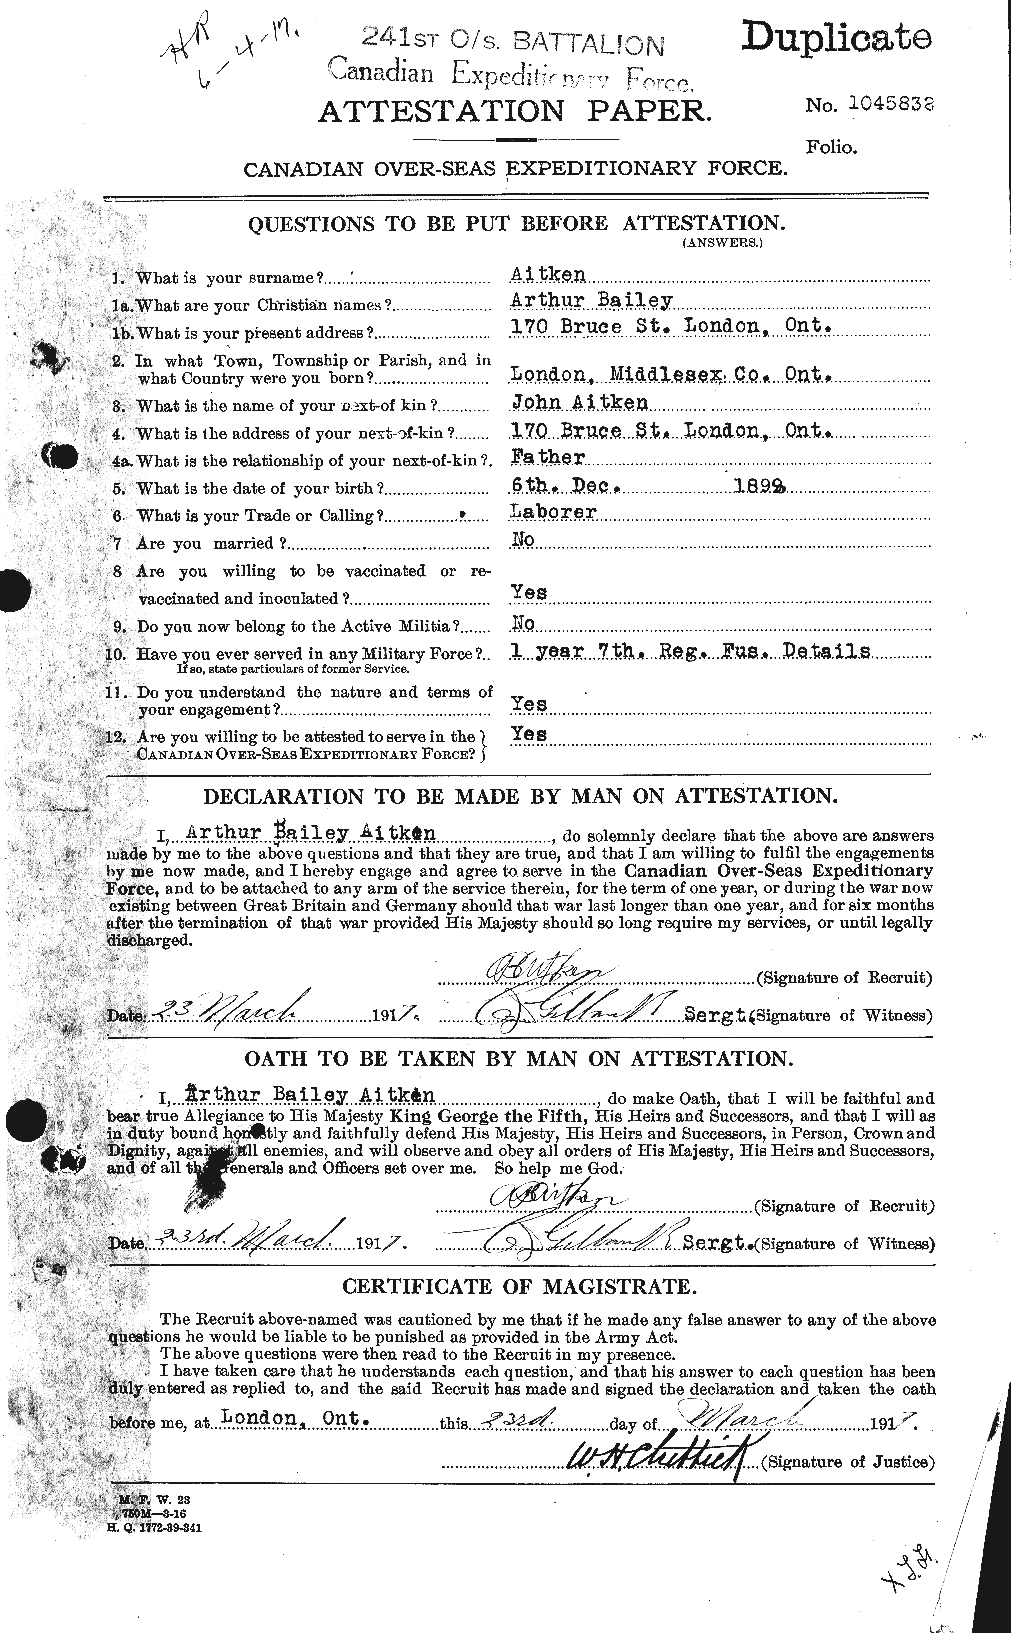 Personnel Records of the First World War - CEF 203338a